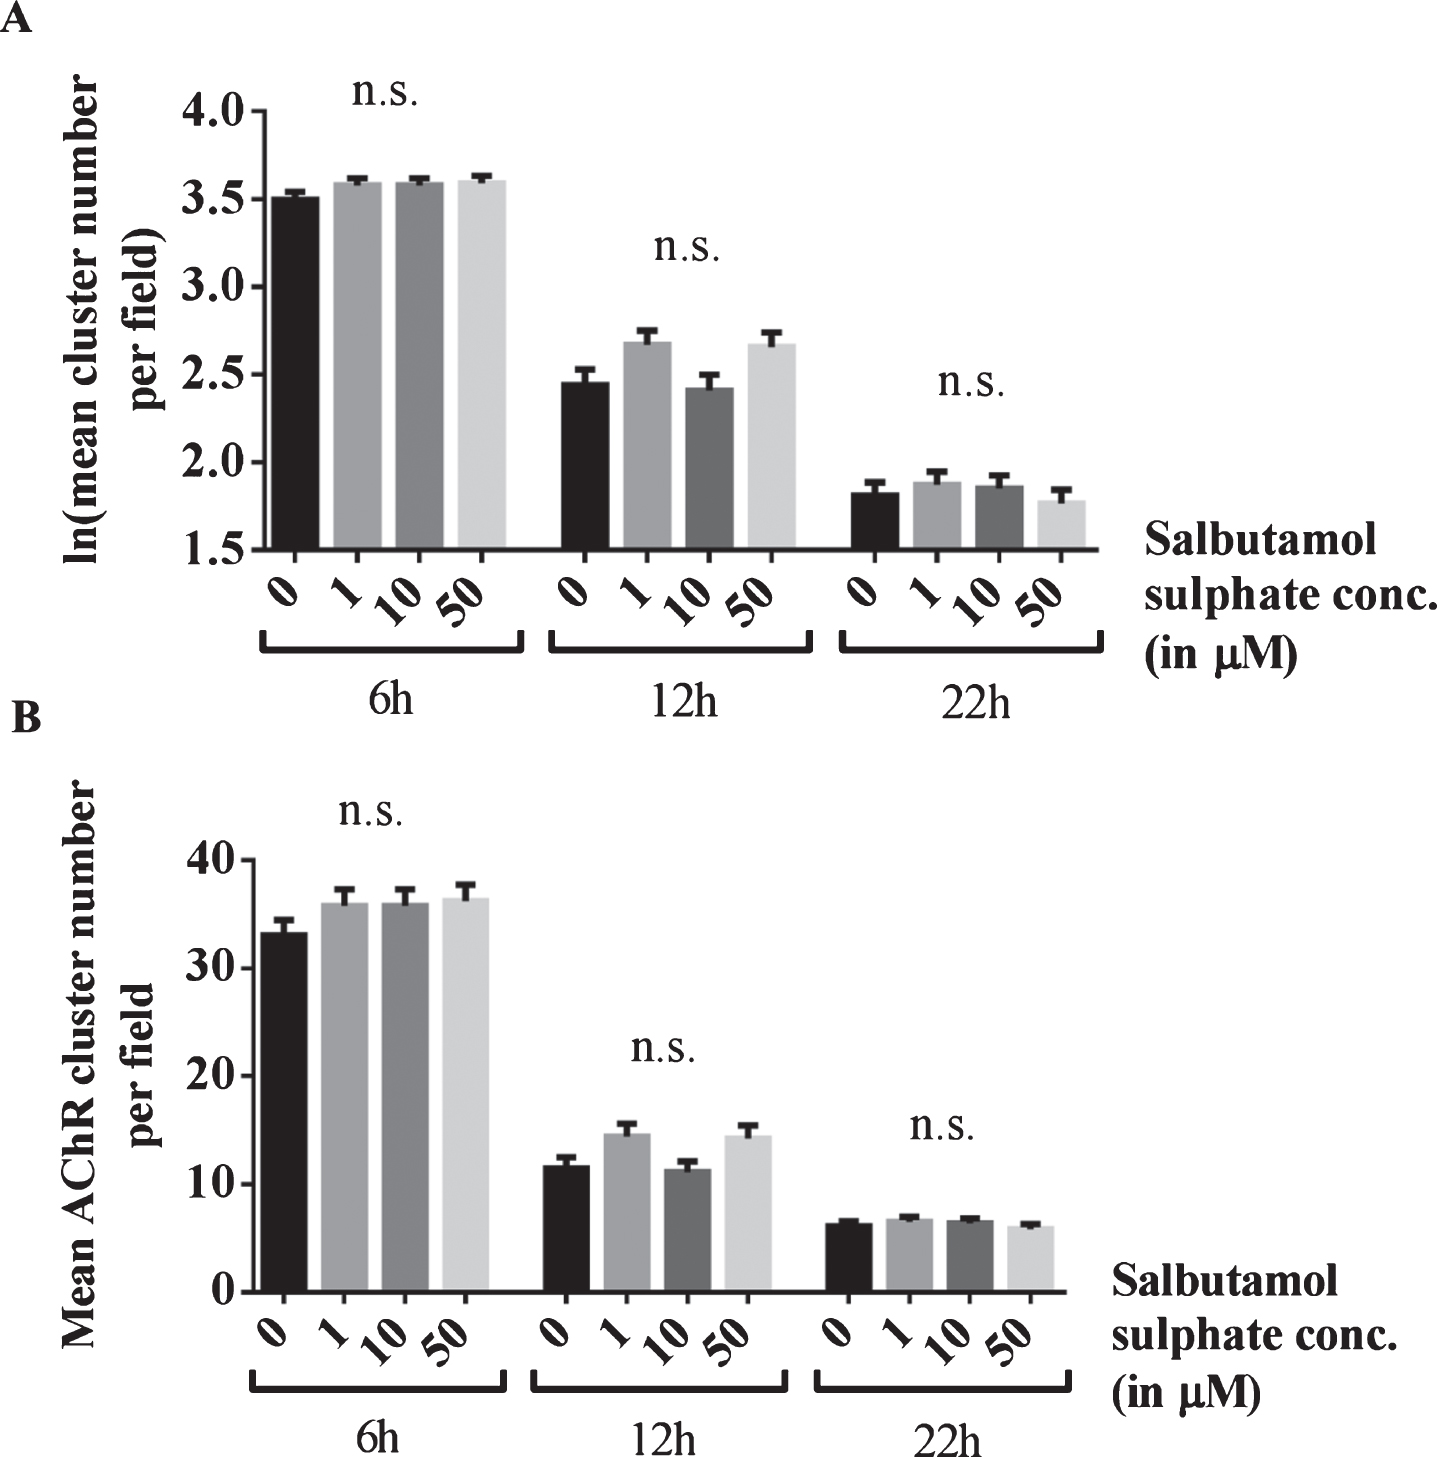 Blocking of the effects of salbutamol on AChR clusters after agrin wash-off by inhibition of ADRB2 s. (A) C2C12 WT myotubes were incubated with short rat agrin overnight. After agrin wash-off, AChR clusters were left for dispersal for 6, 12 or 22 h, during which myotubes were incubated with a mix of 0, 1, 10 or 50 μM salbutamol sulphate and 1 μM ICI-118,551. The ADRB2 inhibitor abolished the stabilising effect of salbutamol on AChR clusters and no difference occurred between salbutamol-treated and untreated cells (6h: difference = 0.08, SE = 0.06, p = 0.47, difference = 0.08, SE = 0.06, p = 0.47, and difference = 0.09, SE = 0.06, p = 0.3, 12h: difference = 0.23, SE = 0.1, p = 0.06, difference = 0.03, SE = 0.1, p > 0.99, and difference = 0.22, SE = 0.1, p = 0.08, and 22h: difference = 0.06, SE = 0.11, p > 0.99, difference = 0.04, SE = 0.11, p > 0.99, and difference = 0.04, SE = 0.11, p > 0.99) (B) Data shown in A back-transformed into cluster numbers. N = 3 (6 h), N = 2 (12 h and 22 h). Error bars indicate the standard error of the mean. n.s.p > 0.05.